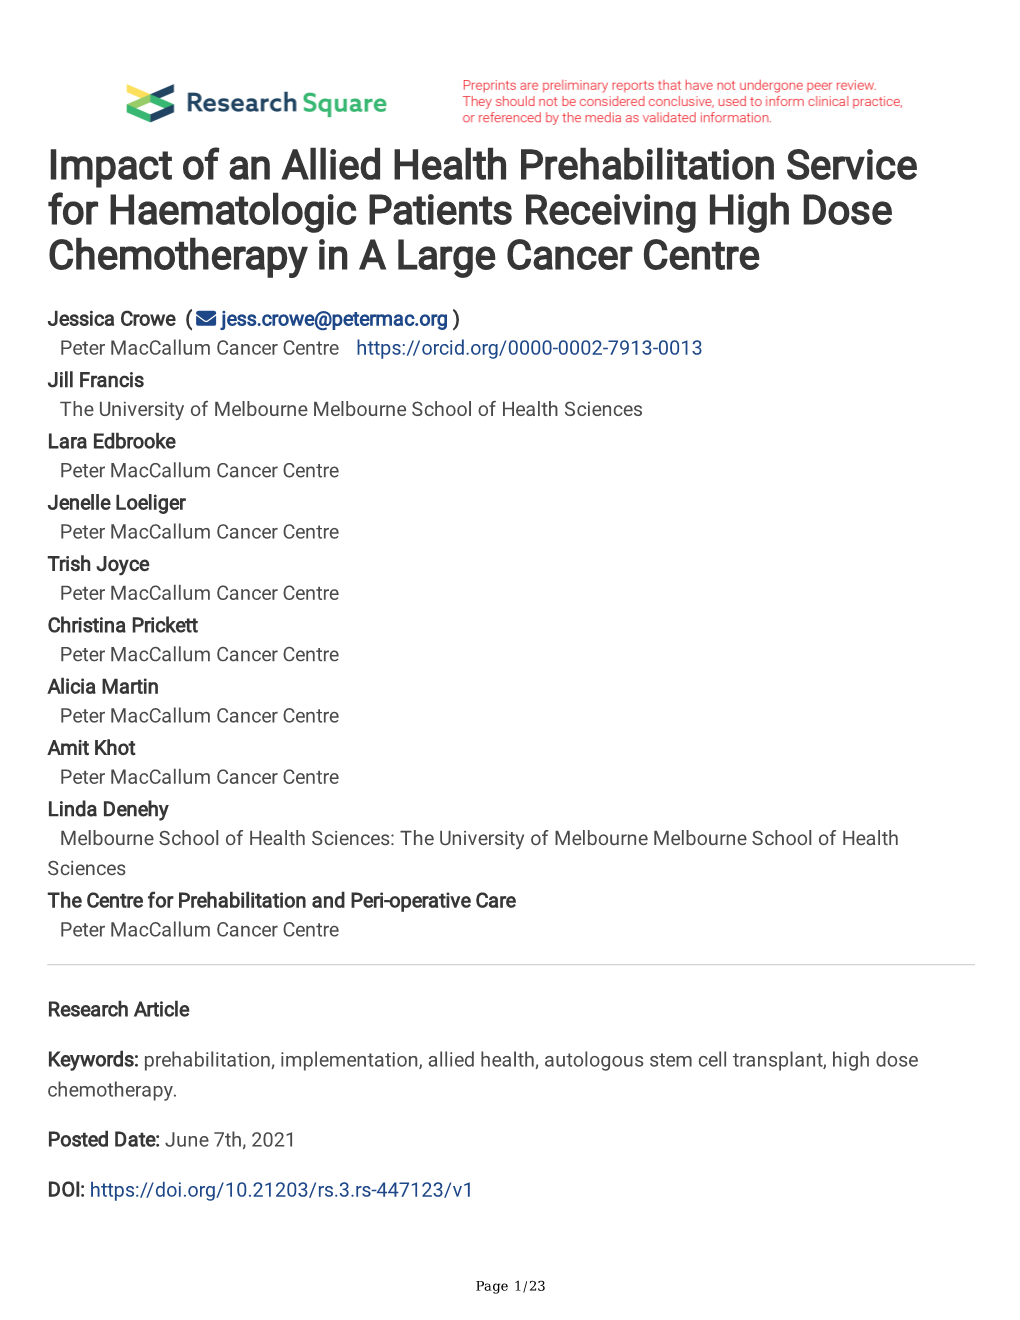 Impact of an Allied Health Prehabilitation Service for Haematologic Patients Receiving High Dose Chemotherapy in a Large Cancer Centre